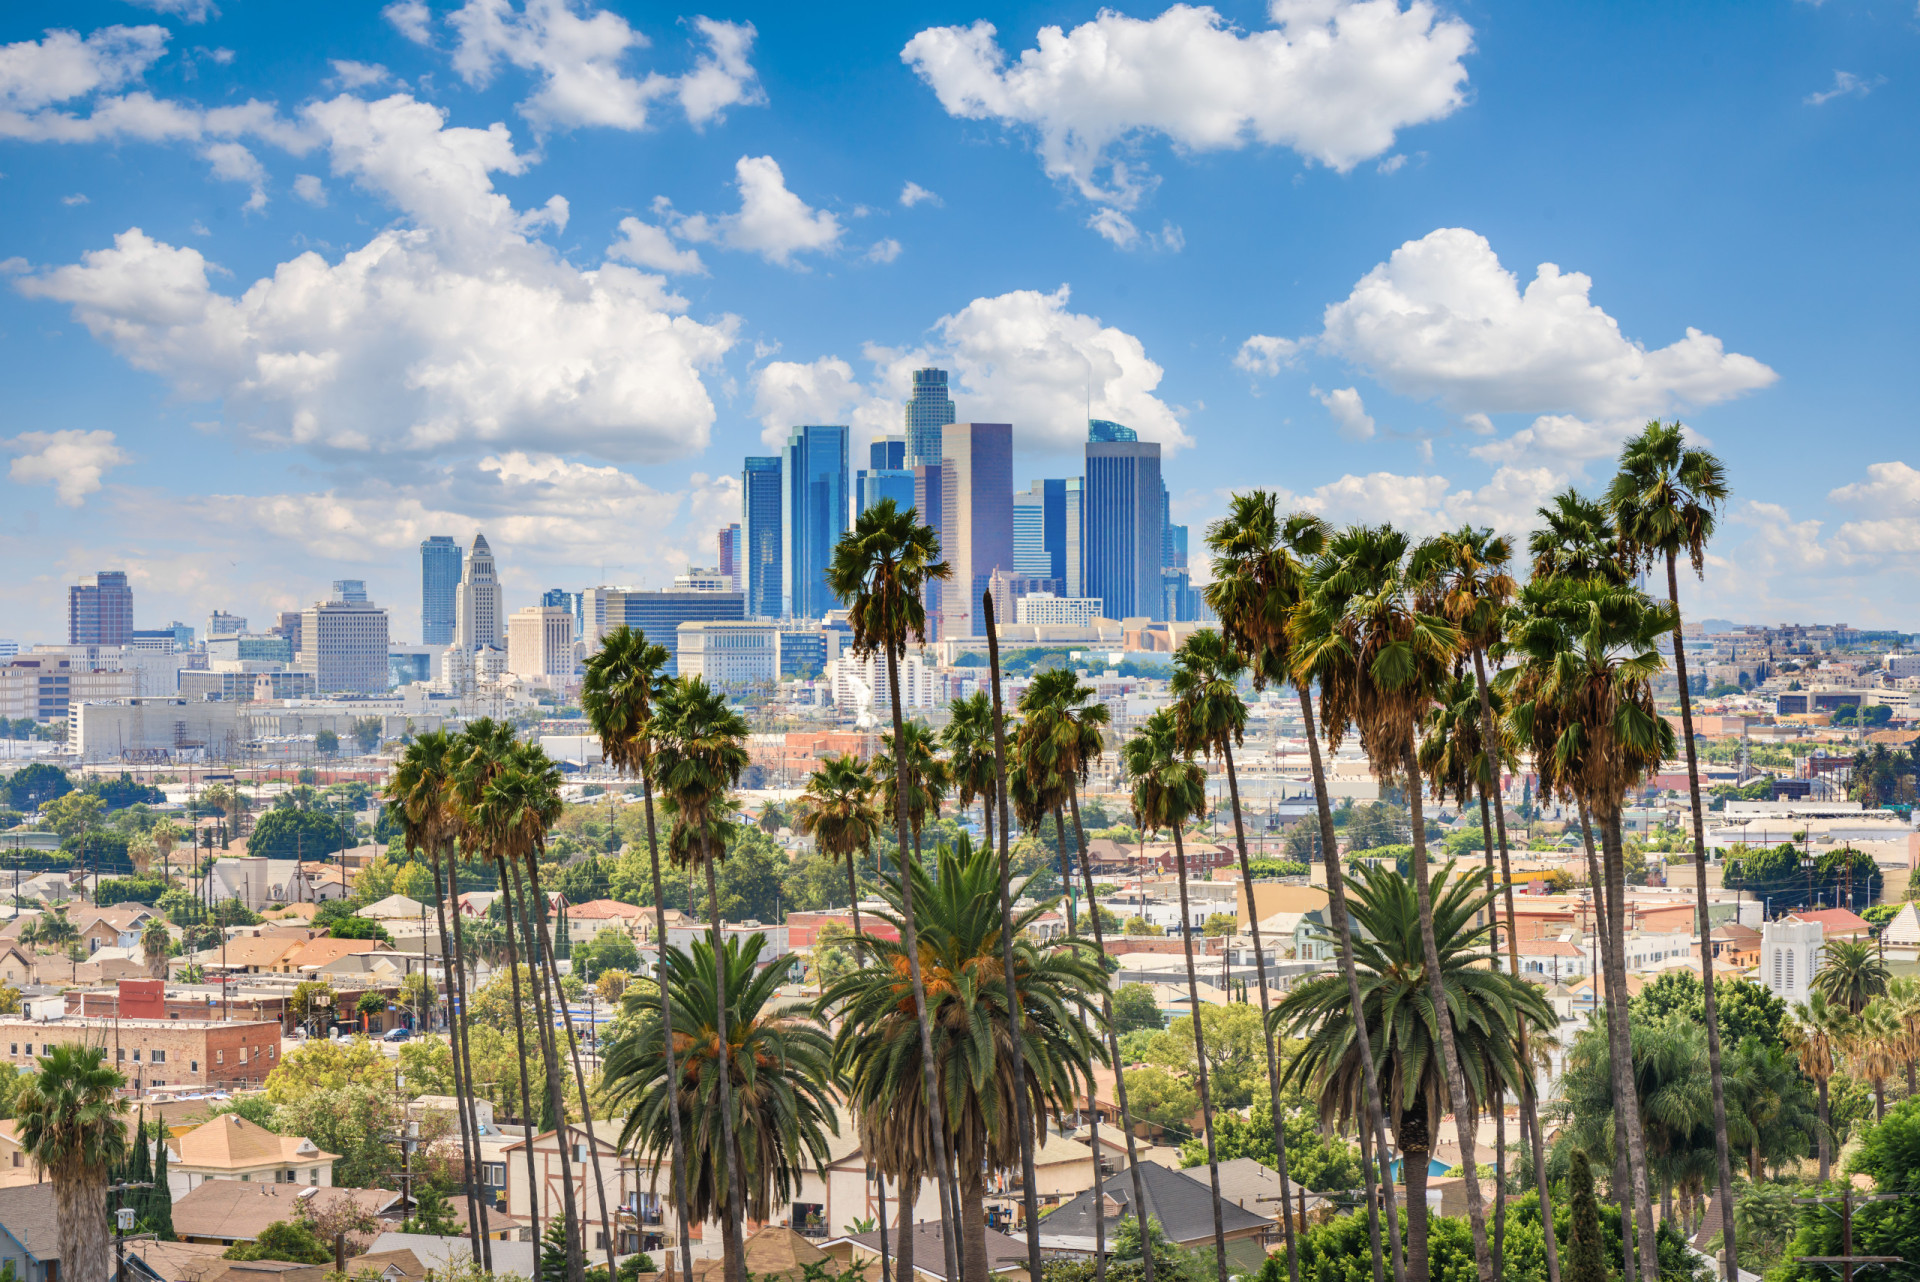 <p>And Los Angeles in California has been known to record a dangerous 10 on the UVI, its citizens sometimes unaware of the strength of the ultraviolet rays bombarding them.</p><p>You may also like:<a href="https://www.starsinsider.com/n/472657?utm_source=msn.com&utm_medium=display&utm_campaign=referral_description&utm_content=685584en-us"> Do you recognize these forms of self-sabotage?</a></p>